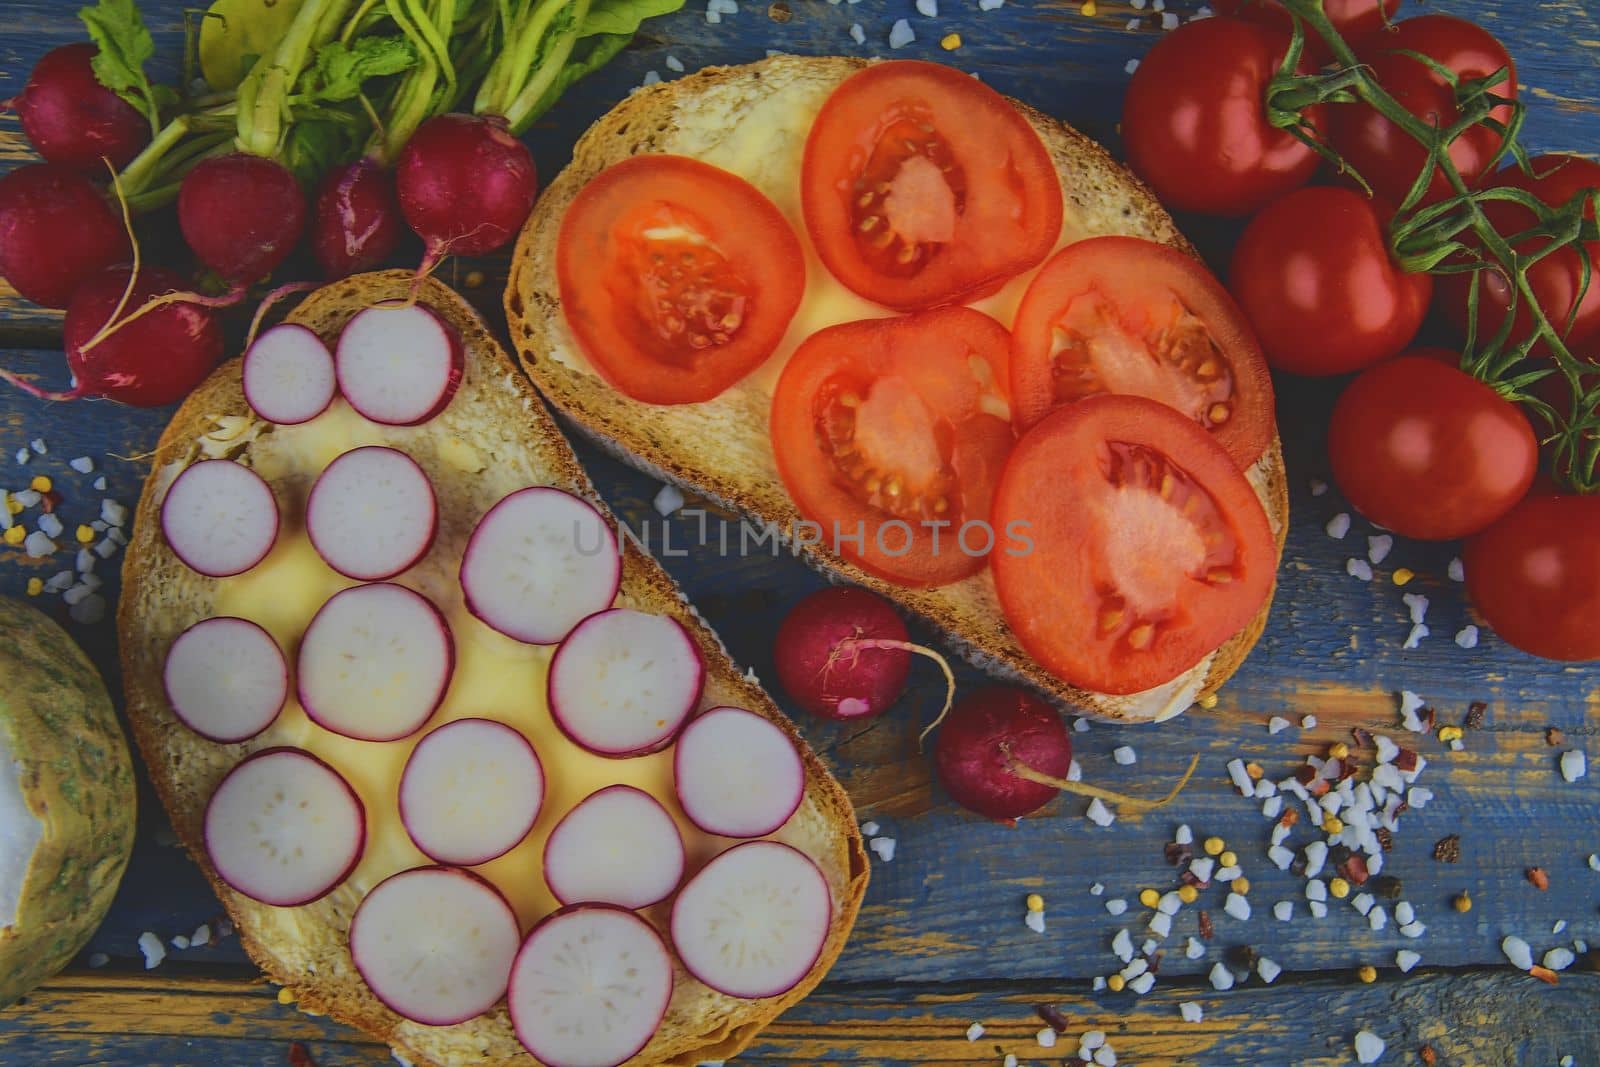 Spread butter on bread with sliced tomatoes and radishes. Fresh snack on natural wooden background. Flat design. Top view.